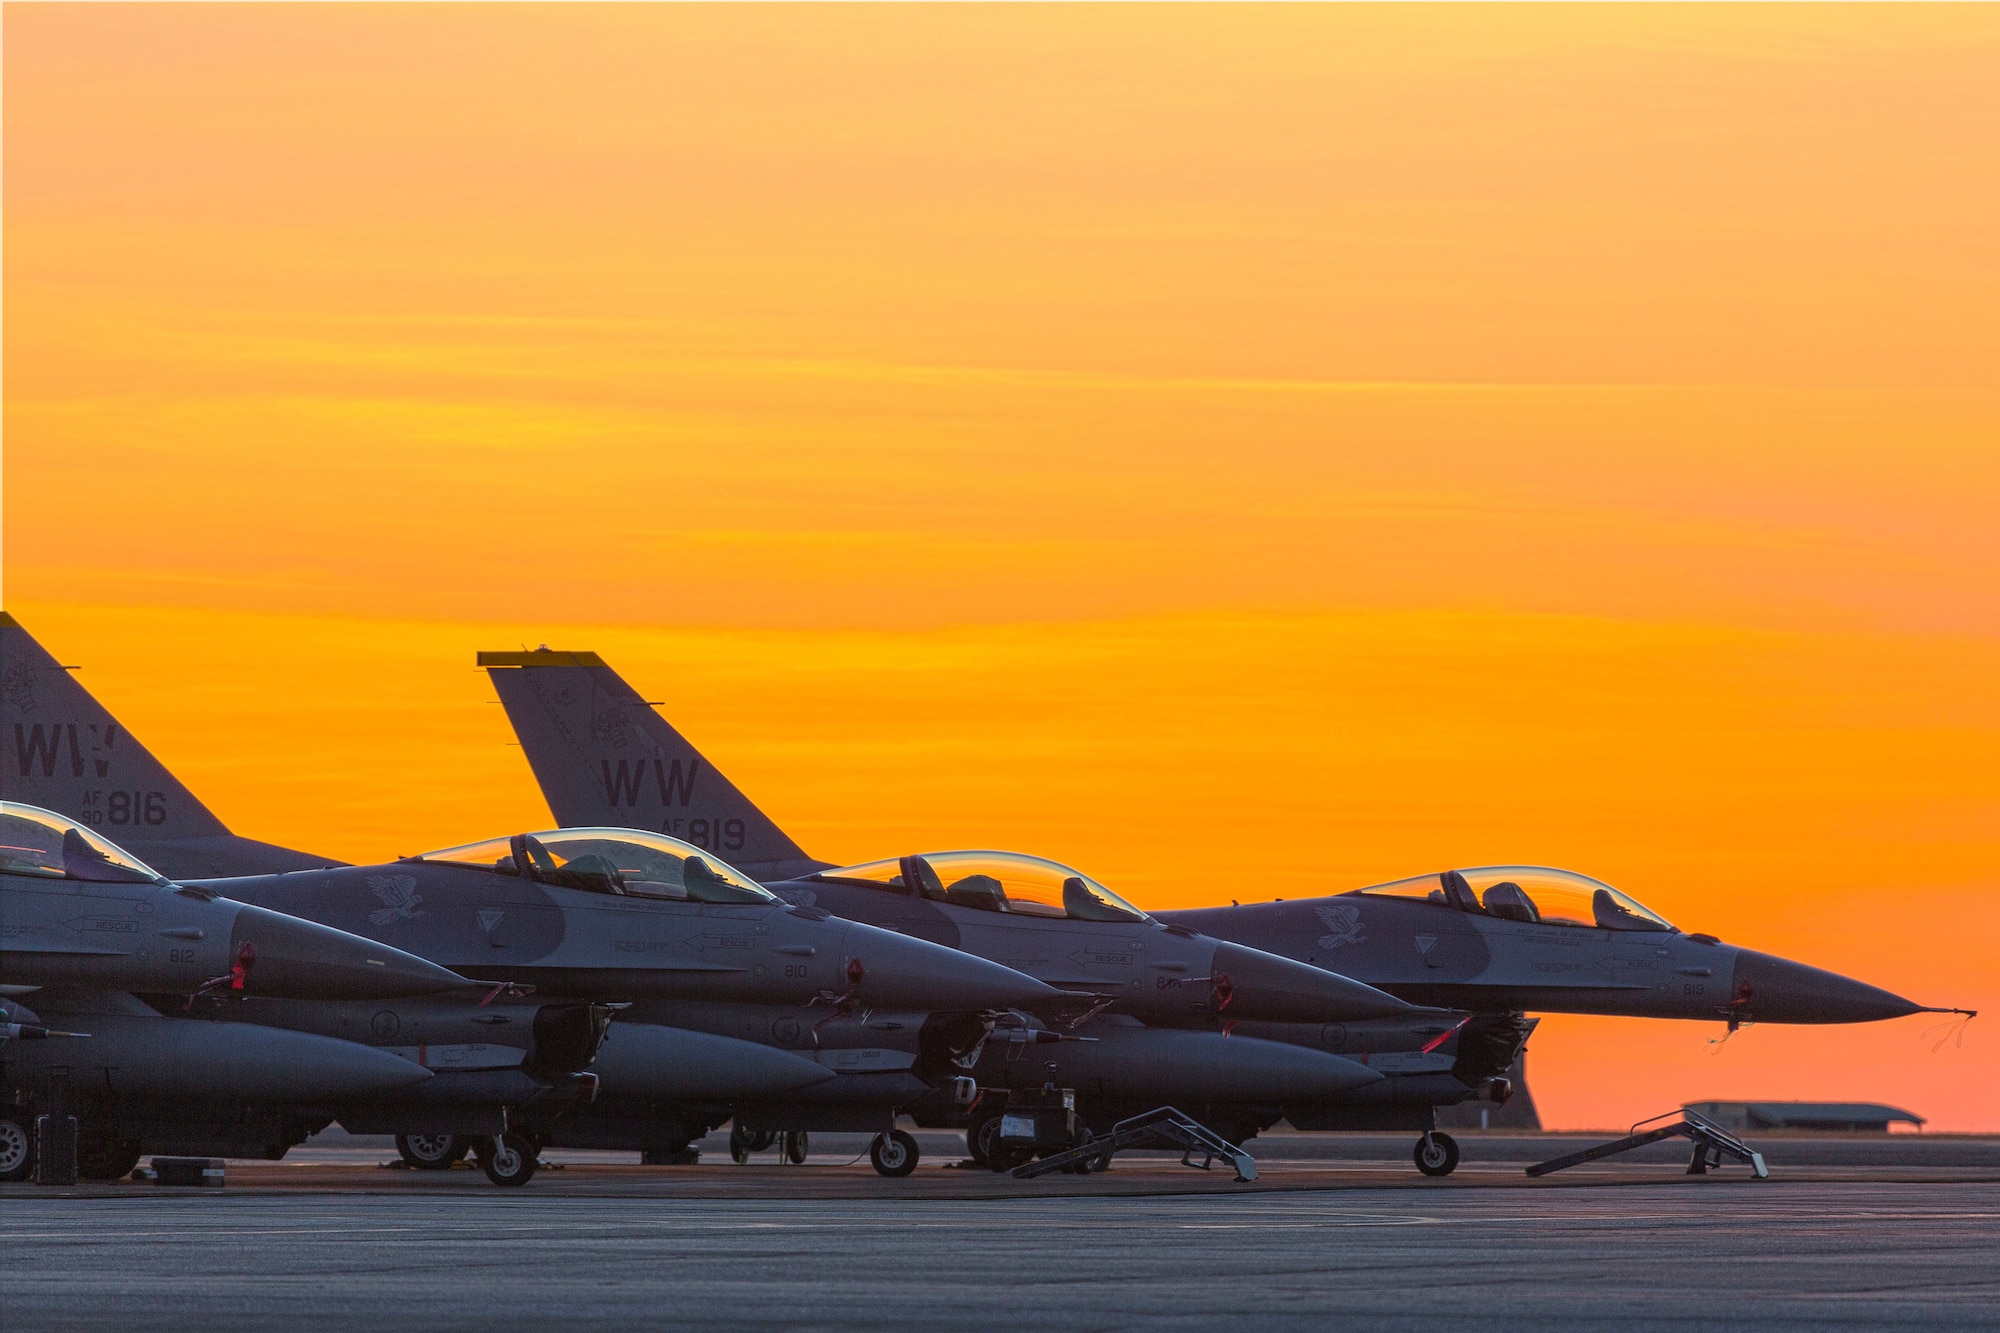 A line up of U.S. Air Force F-16Cs, assigned to the 14th Fighter Squadron, Misawa Air Base, Japan, sit on the tarmac at Royal Australian Air Force (RAAF) Base Darwin during Exercise Pitch Black 16, August 4, 2016. Pitch Black is a biennial multinational air warfare exercise hosted by the RAAF that focuses on offensive counter air and defensive counter air combat in a simulated war environment.